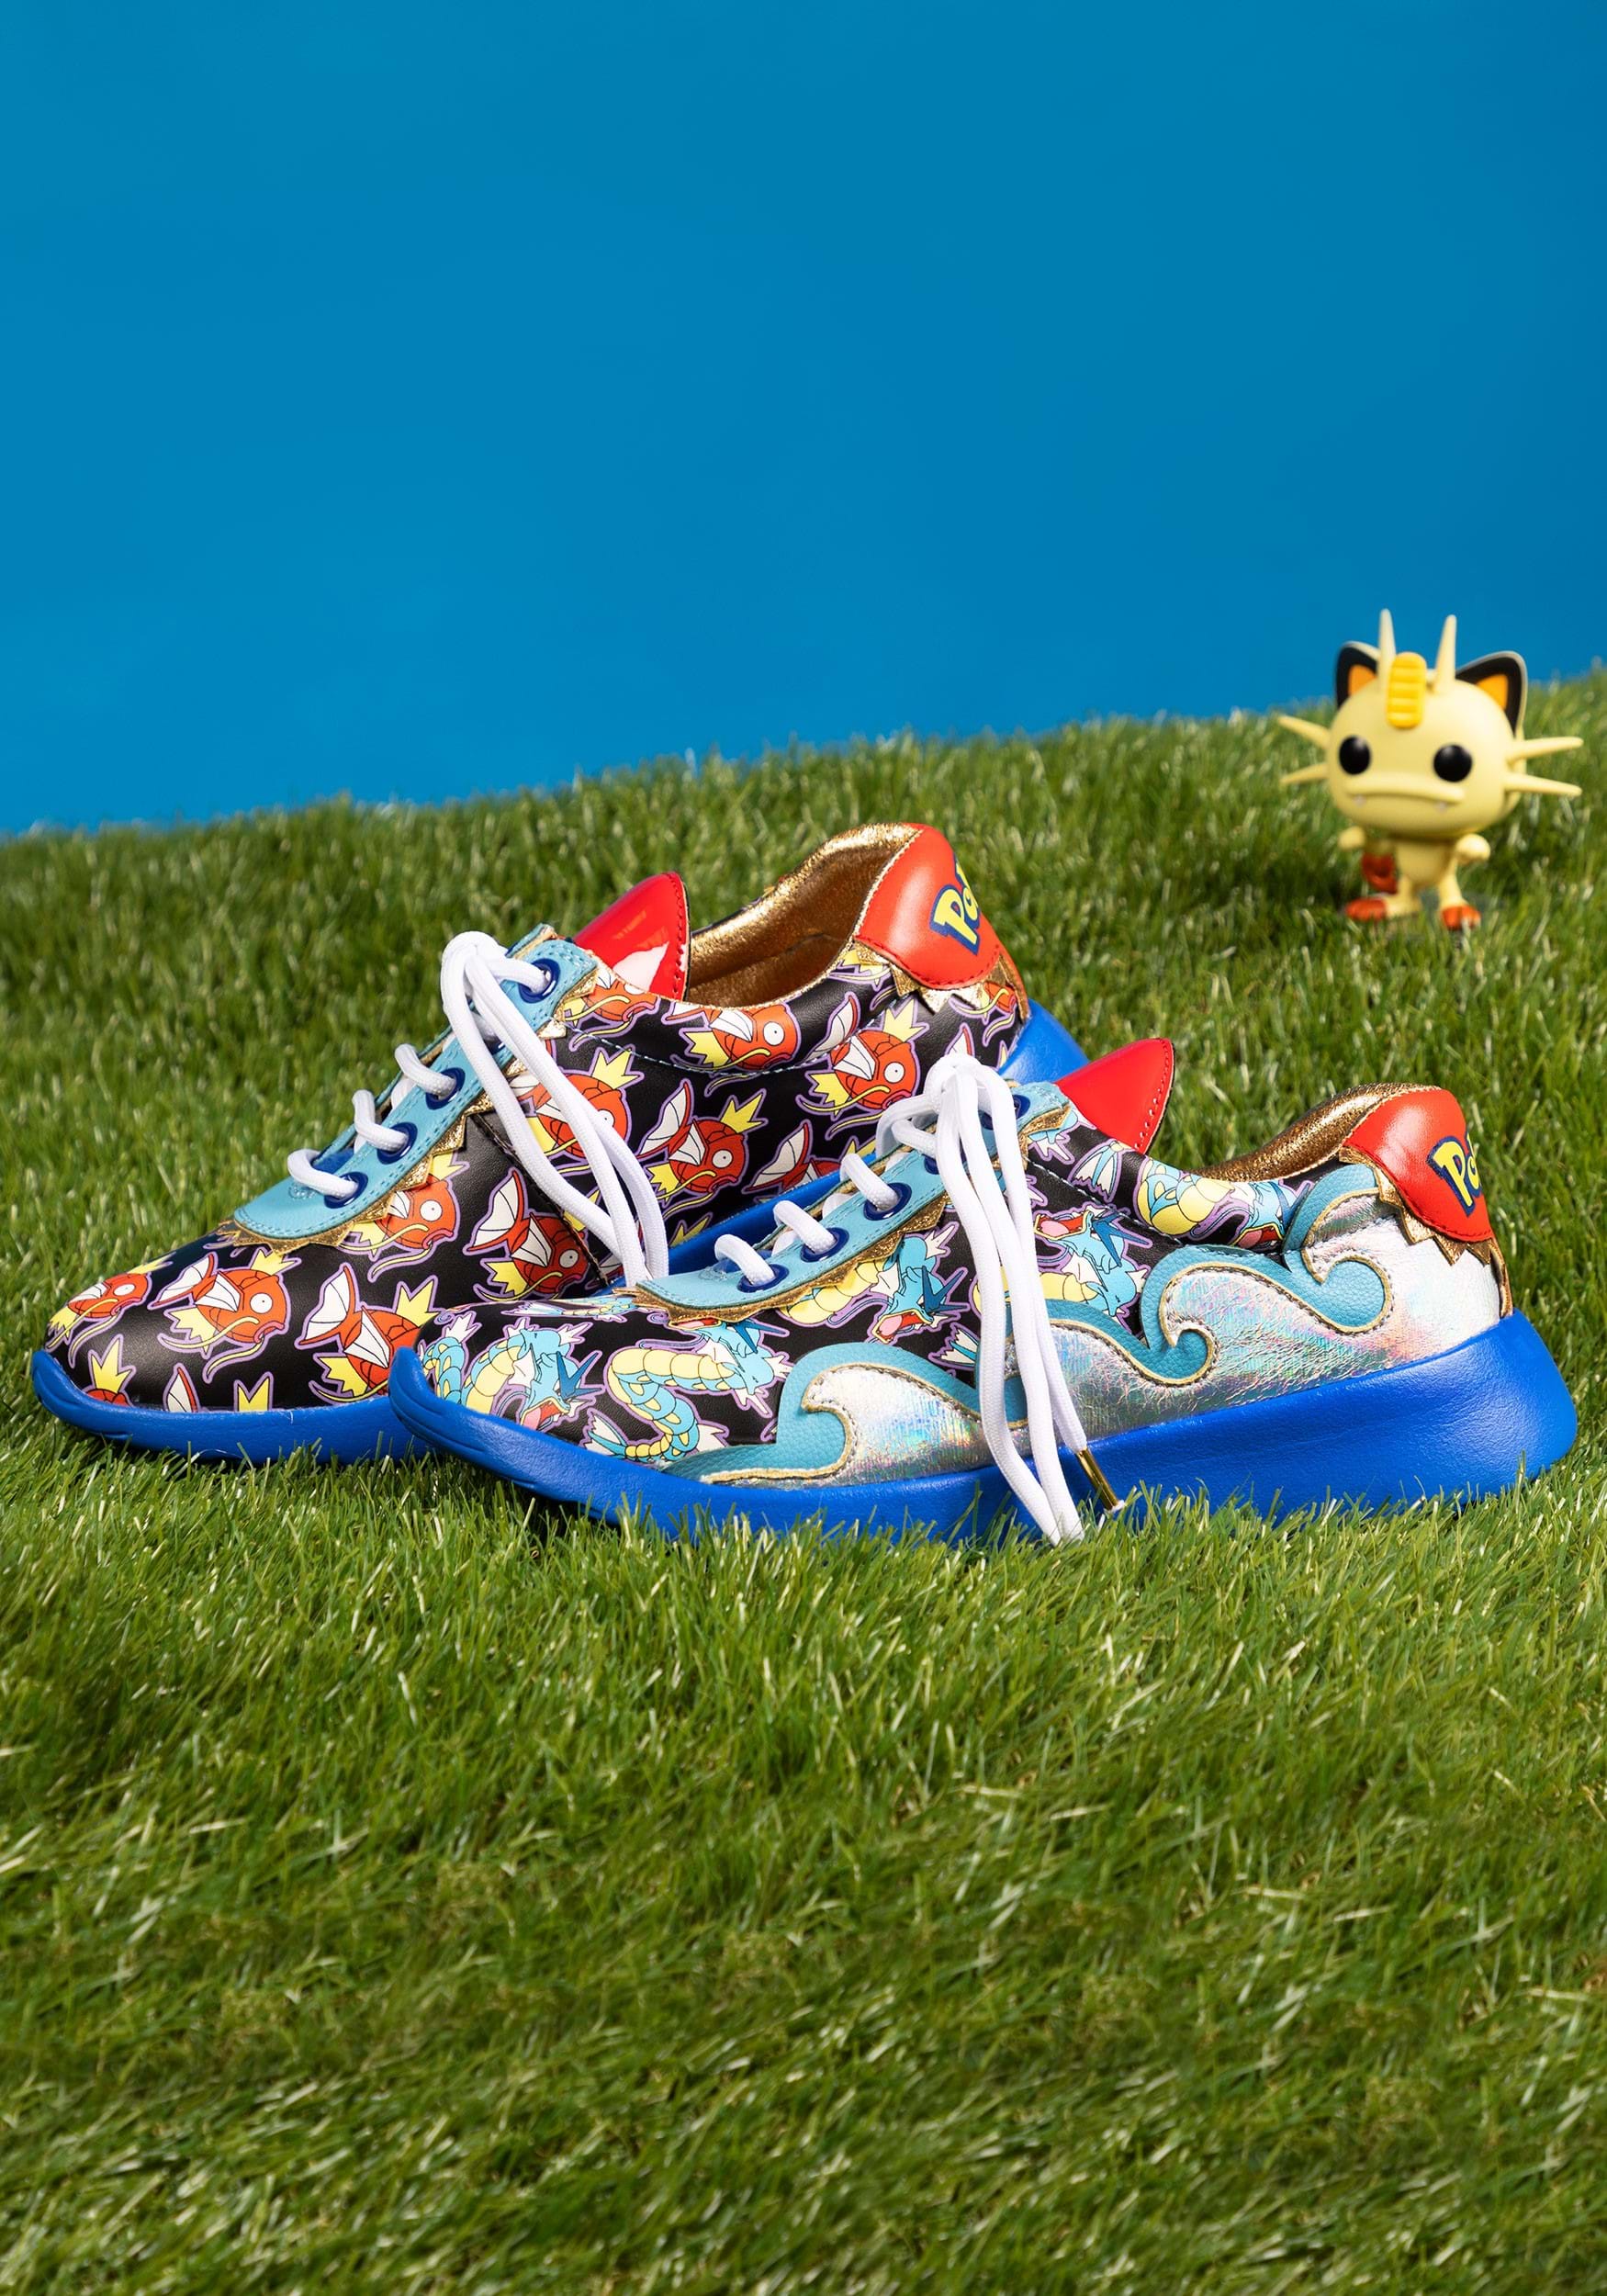 Louis Vuitton Rainbow Sneakers - Domesticated Me